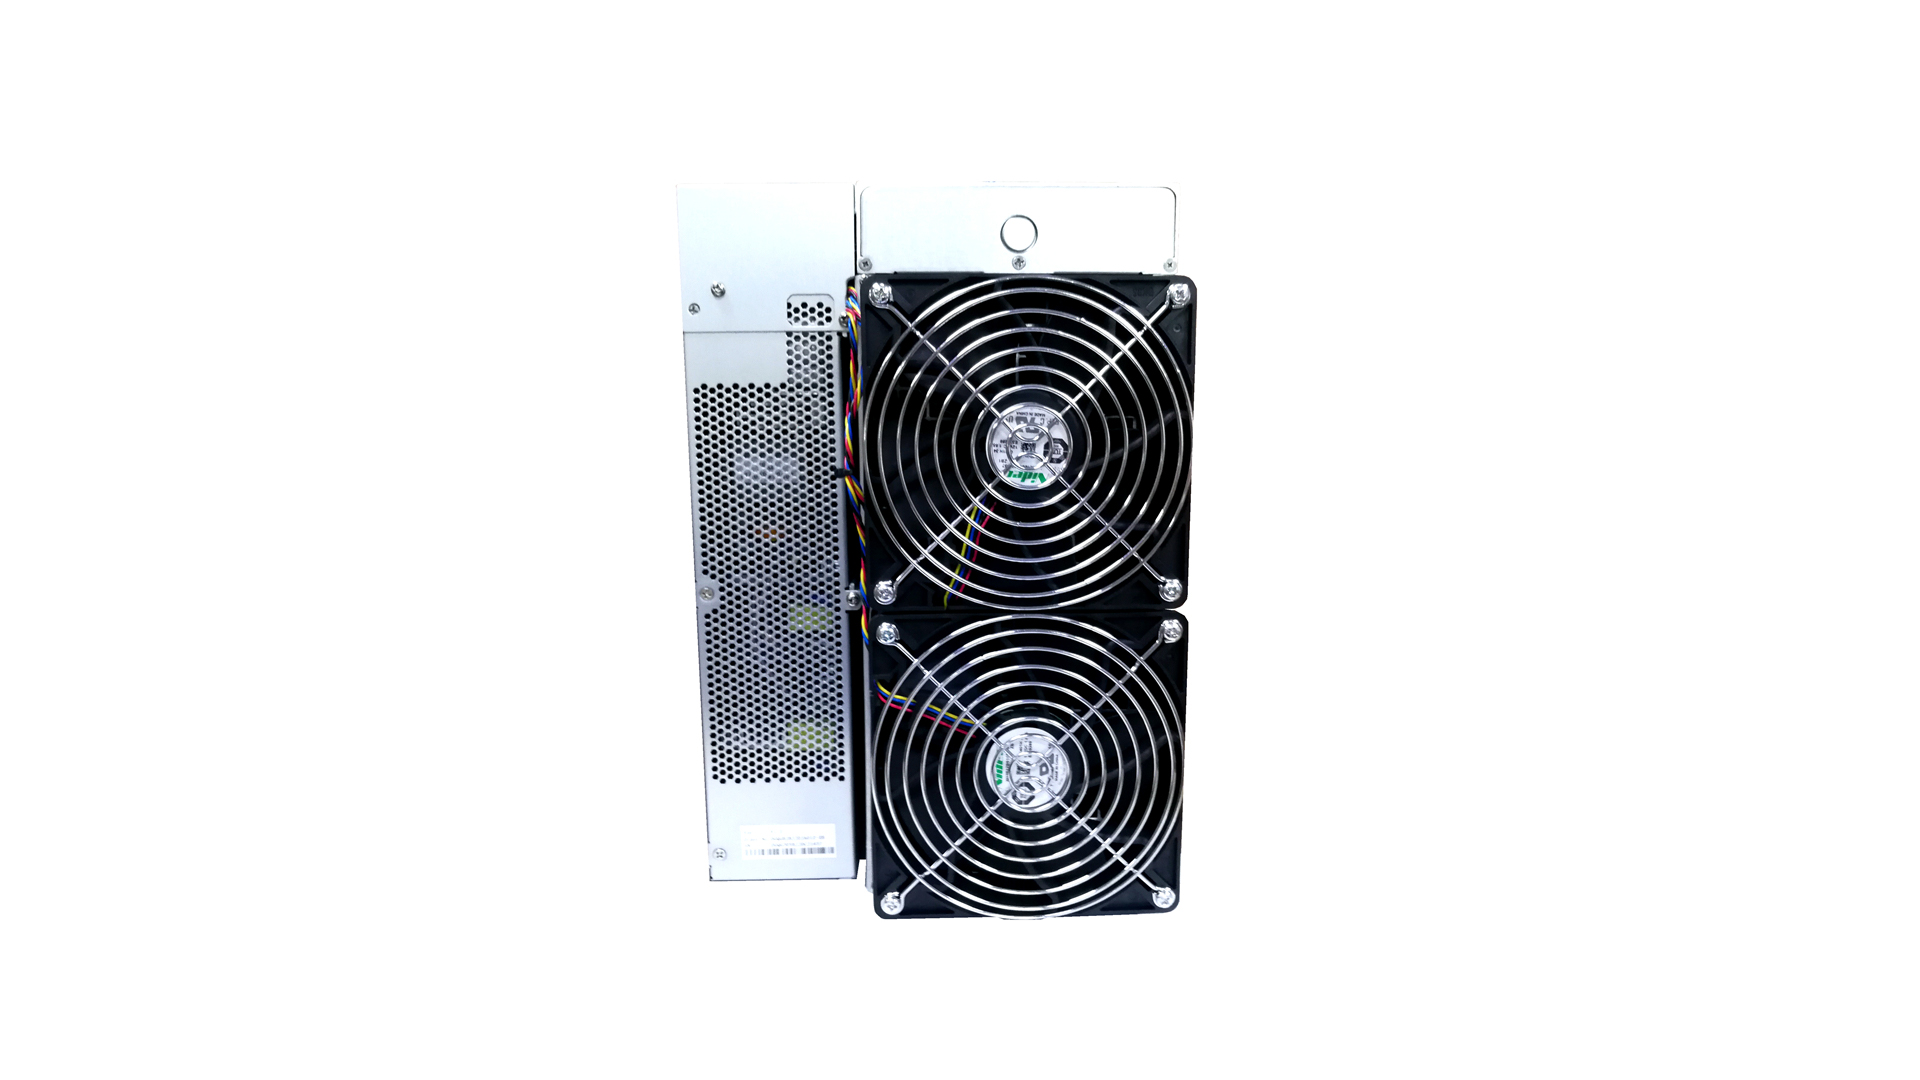 Antminer S19 pro 110Th/s